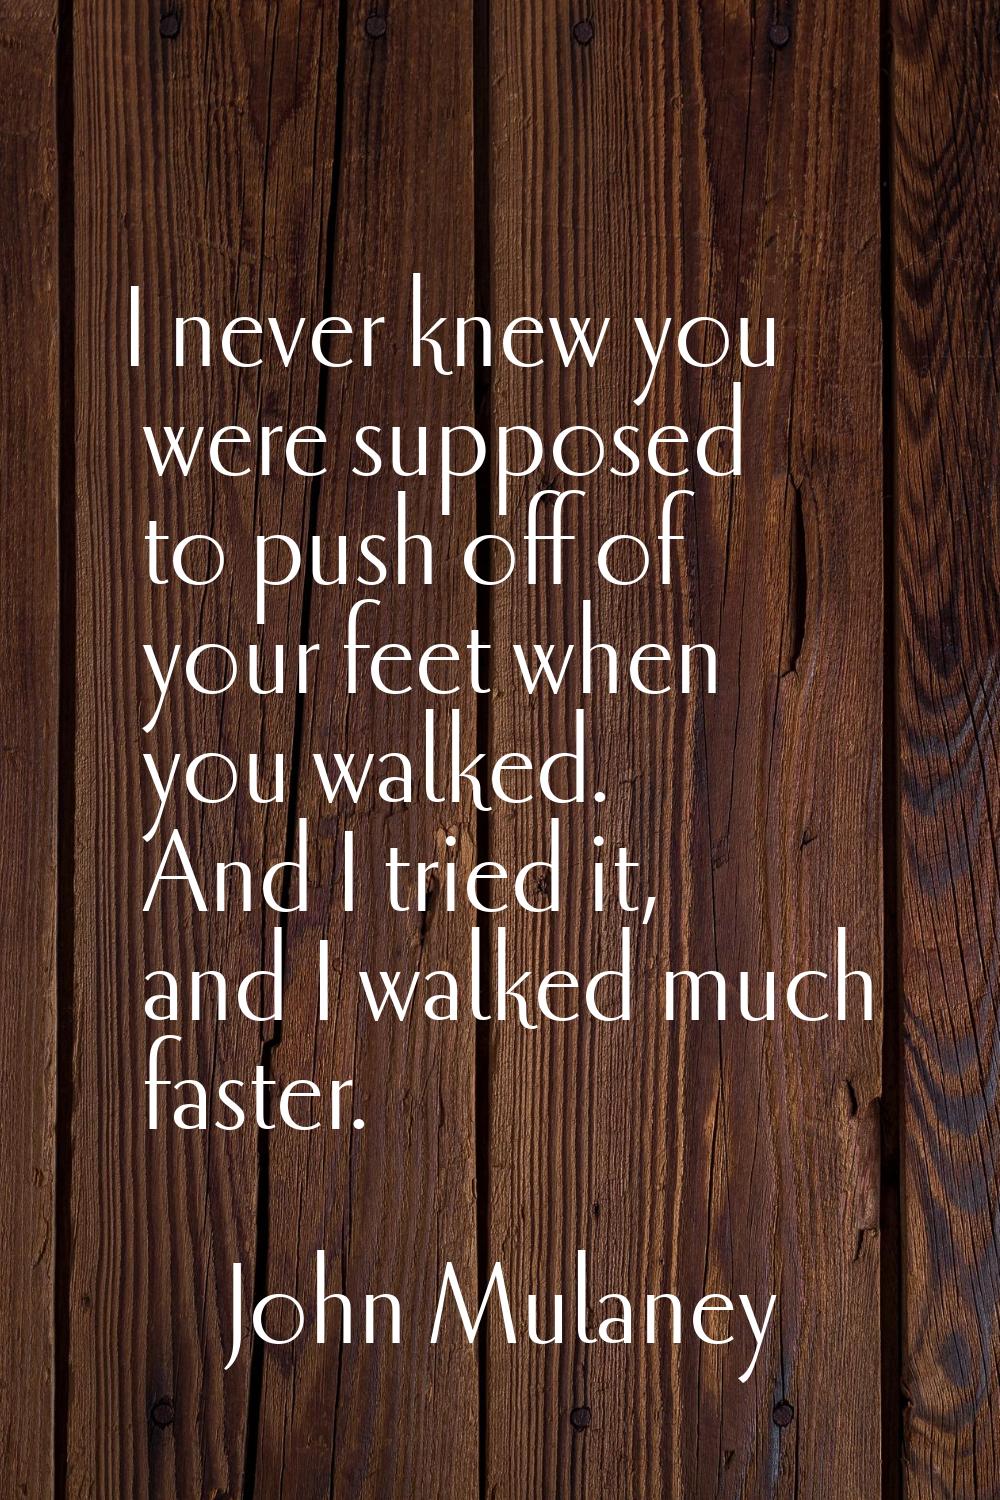 I never knew you were supposed to push off of your feet when you walked. And I tried it, and I walk